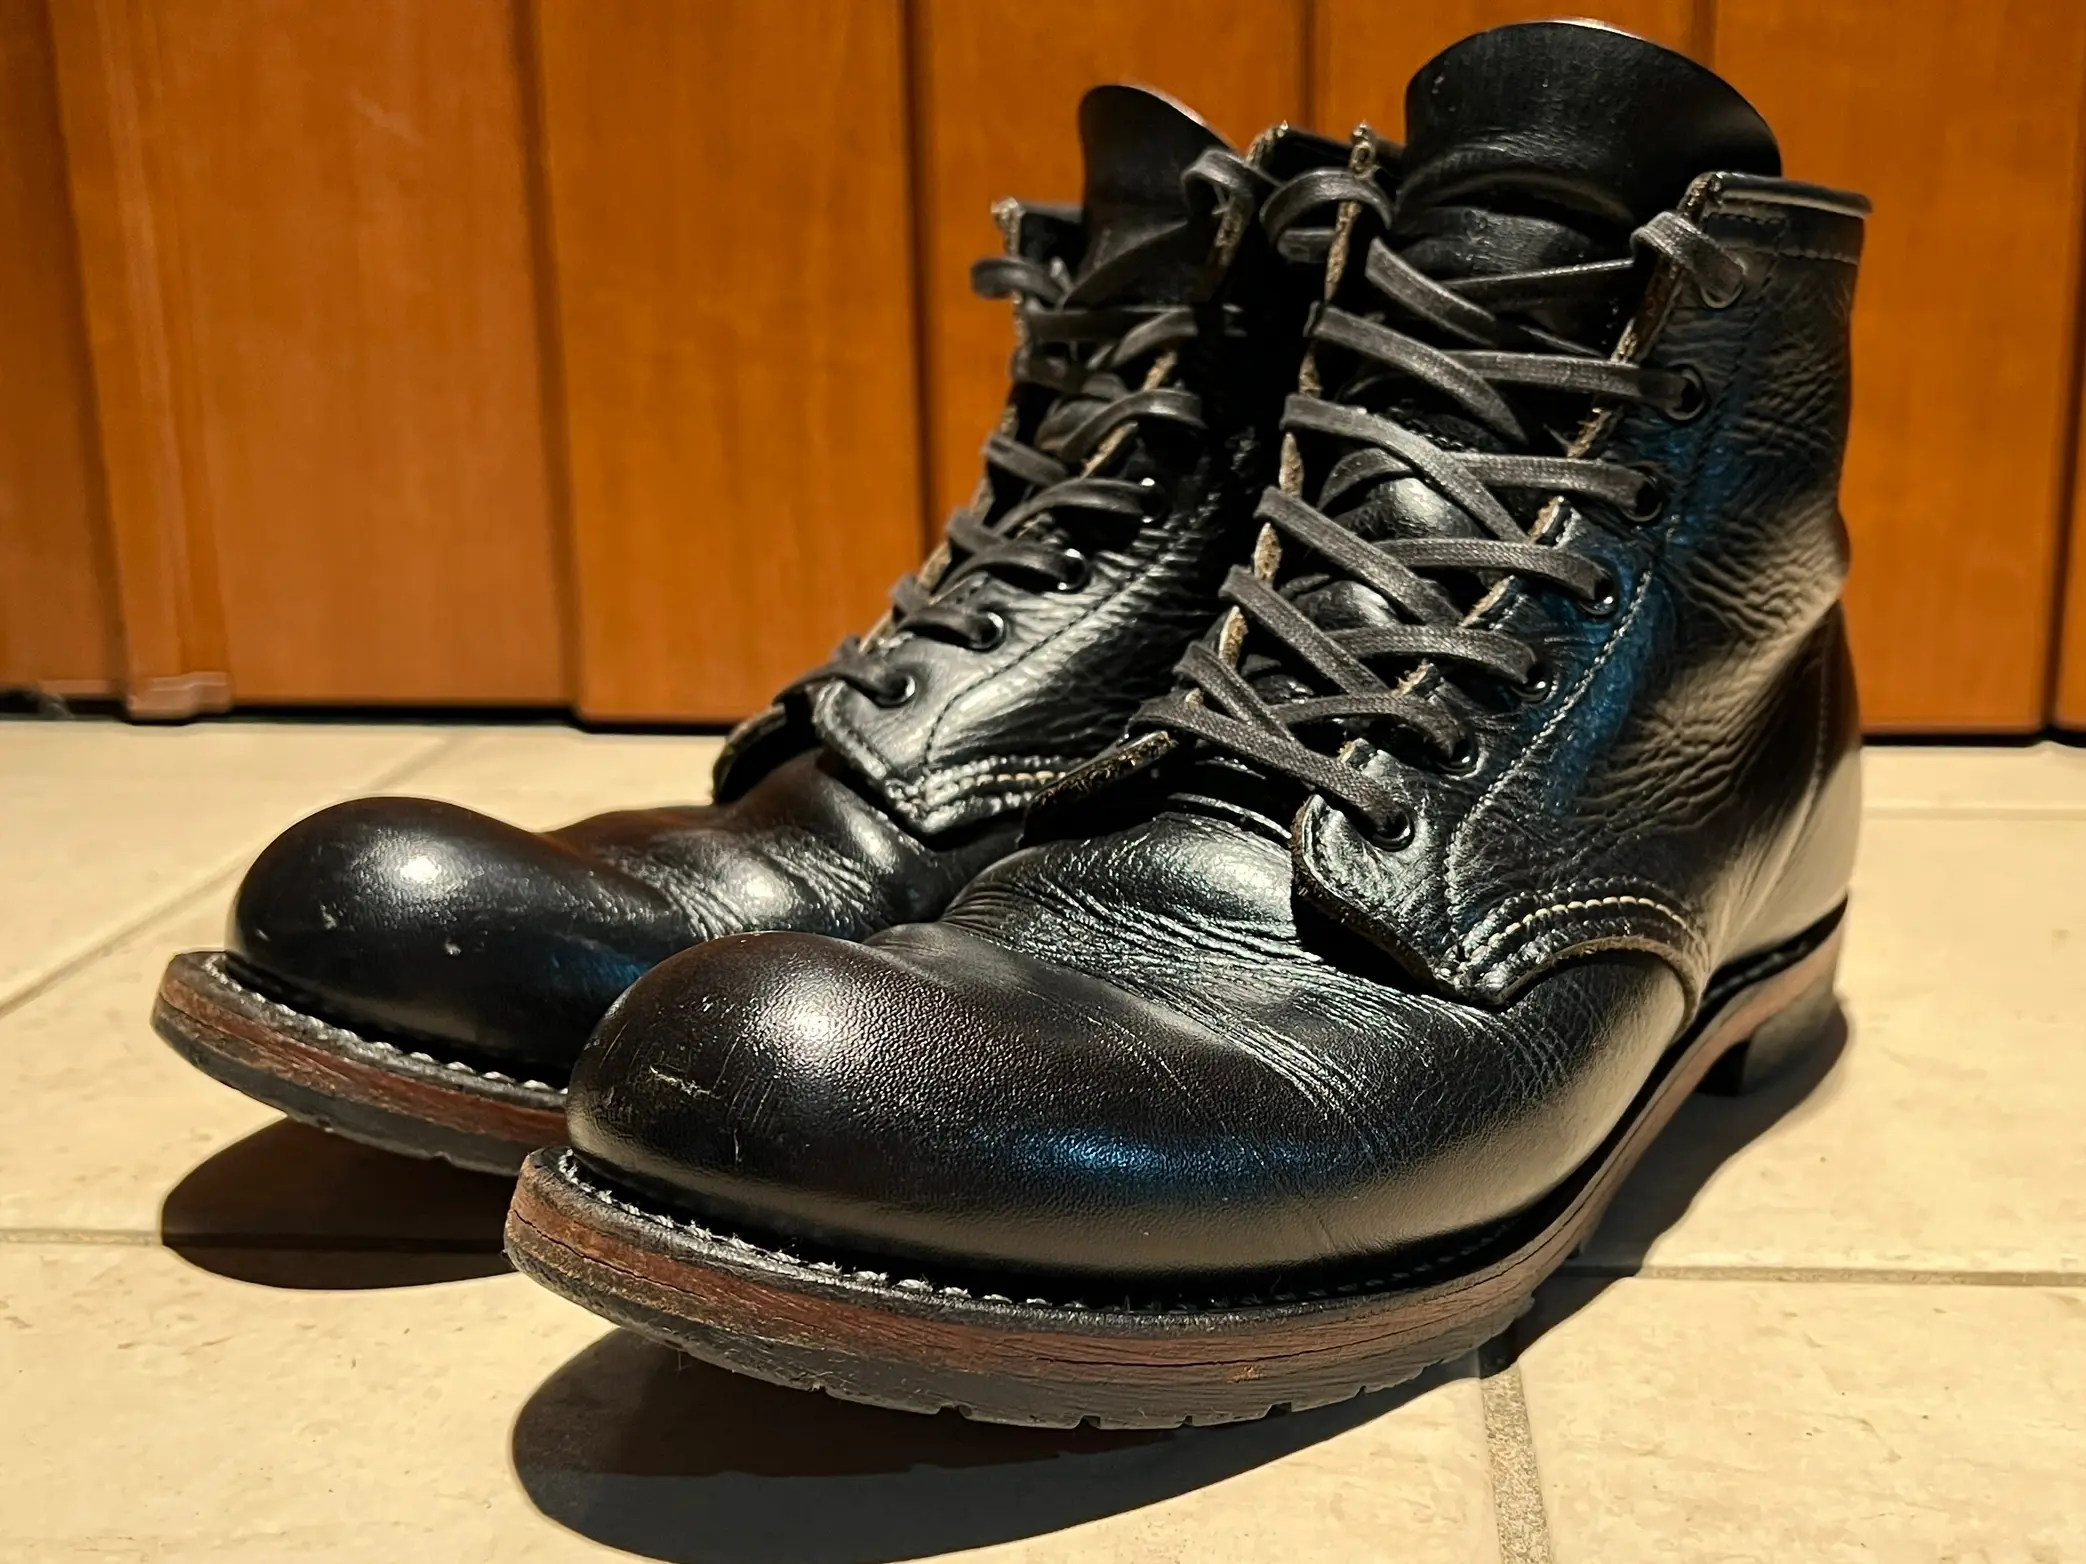 REDWING BECKMAN 9014 IN 11 YEARS | Gallery posted by satoshi | Lemon8